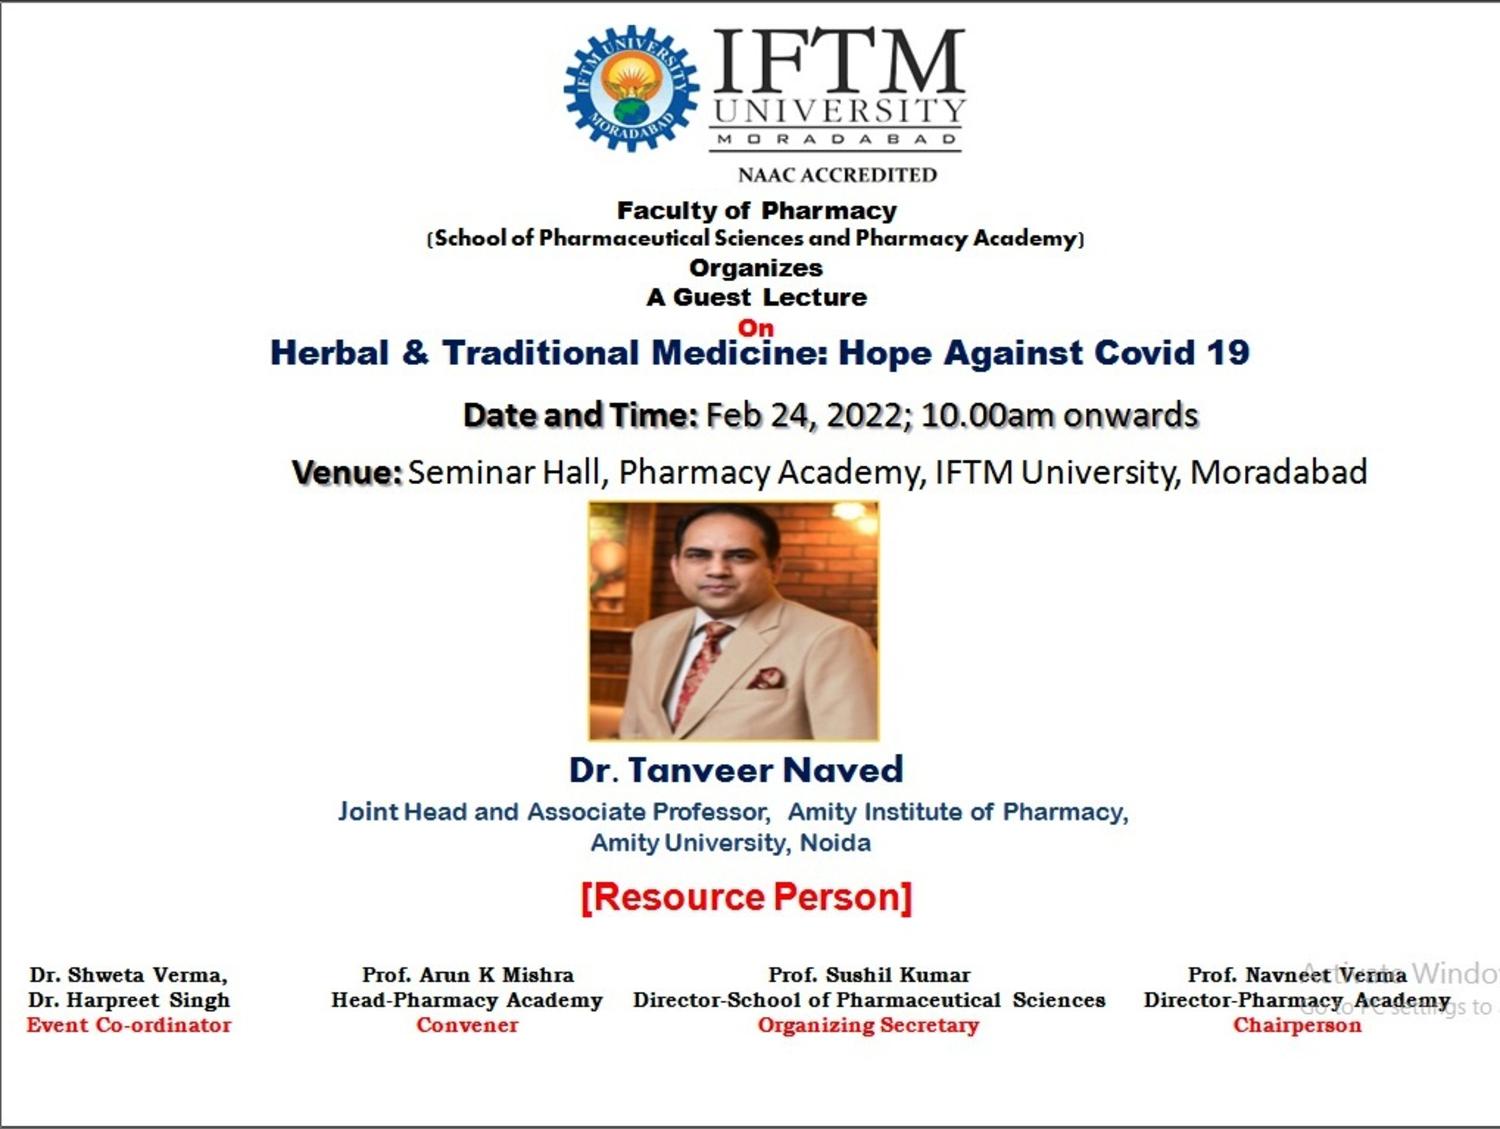 A Guest Lecture on Herbal & Traditional Medicine: Hope against COVID 19